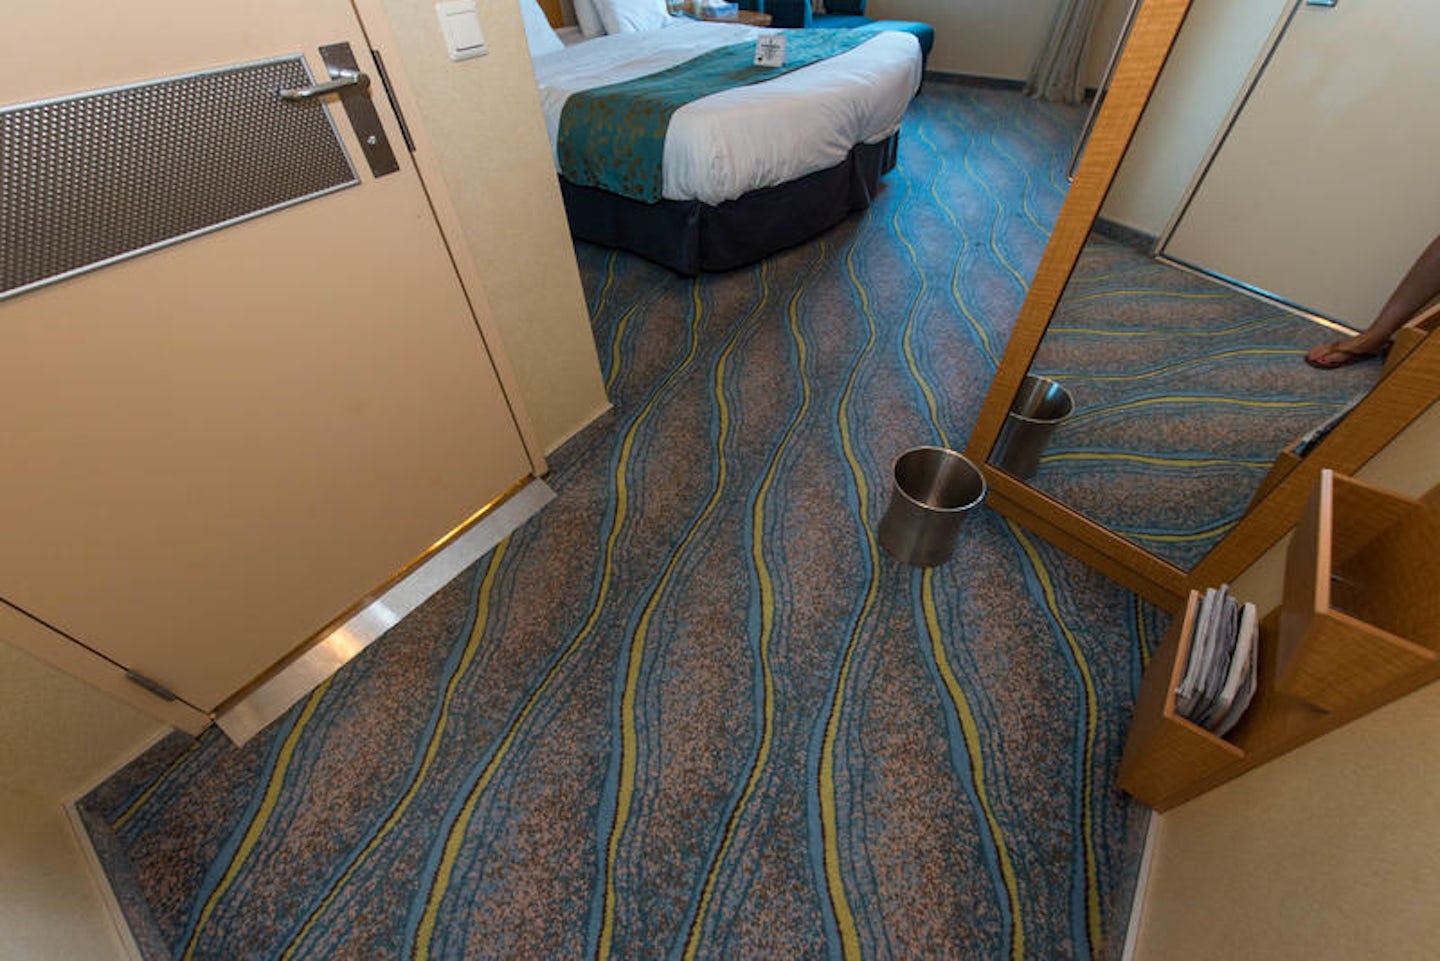 The Accessible Cabin with Porthole on Oasis of the Seas